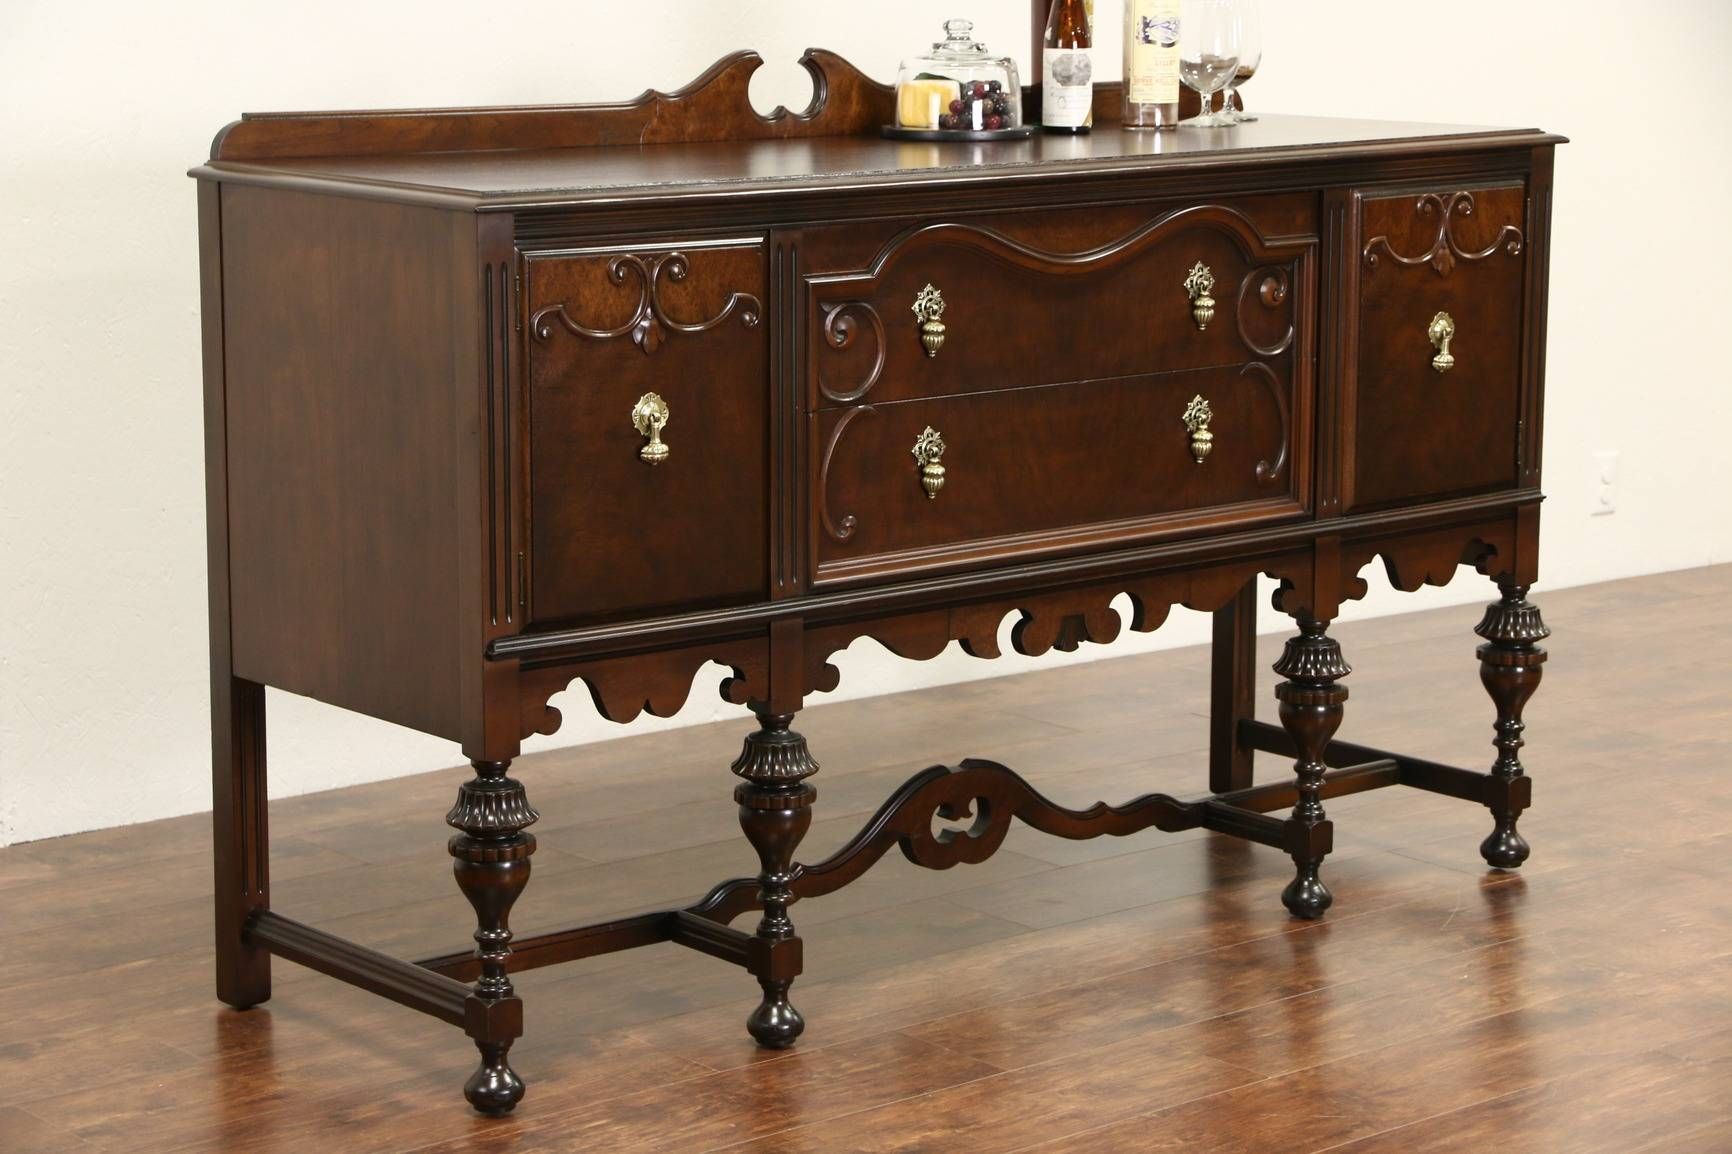 Sold – English Tudor 1920 Antique Walnut Sideboard Server Or Pertaining To 2017 Buffet Sideboard Servers (Photo 13 of 15)